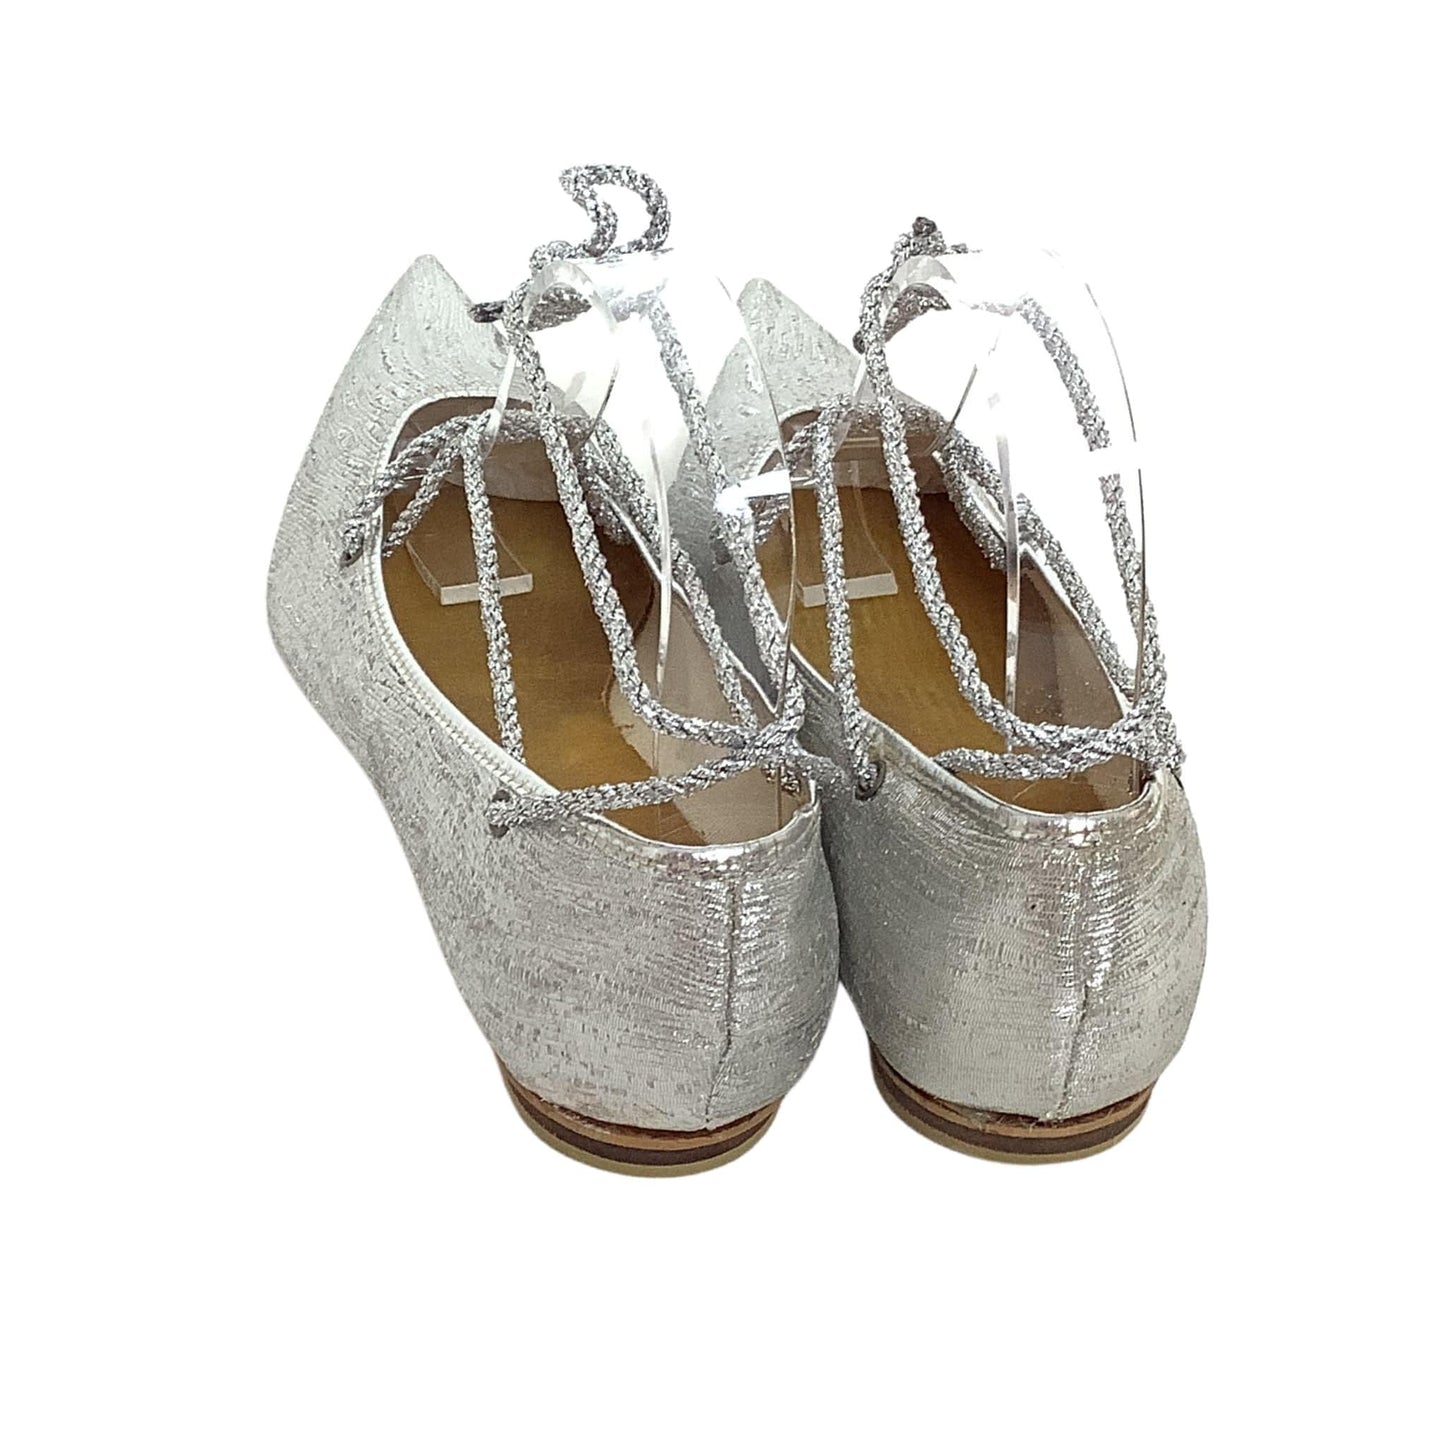 Metallic Silver Laced Flats 7 / Silver / Vintage 1950s